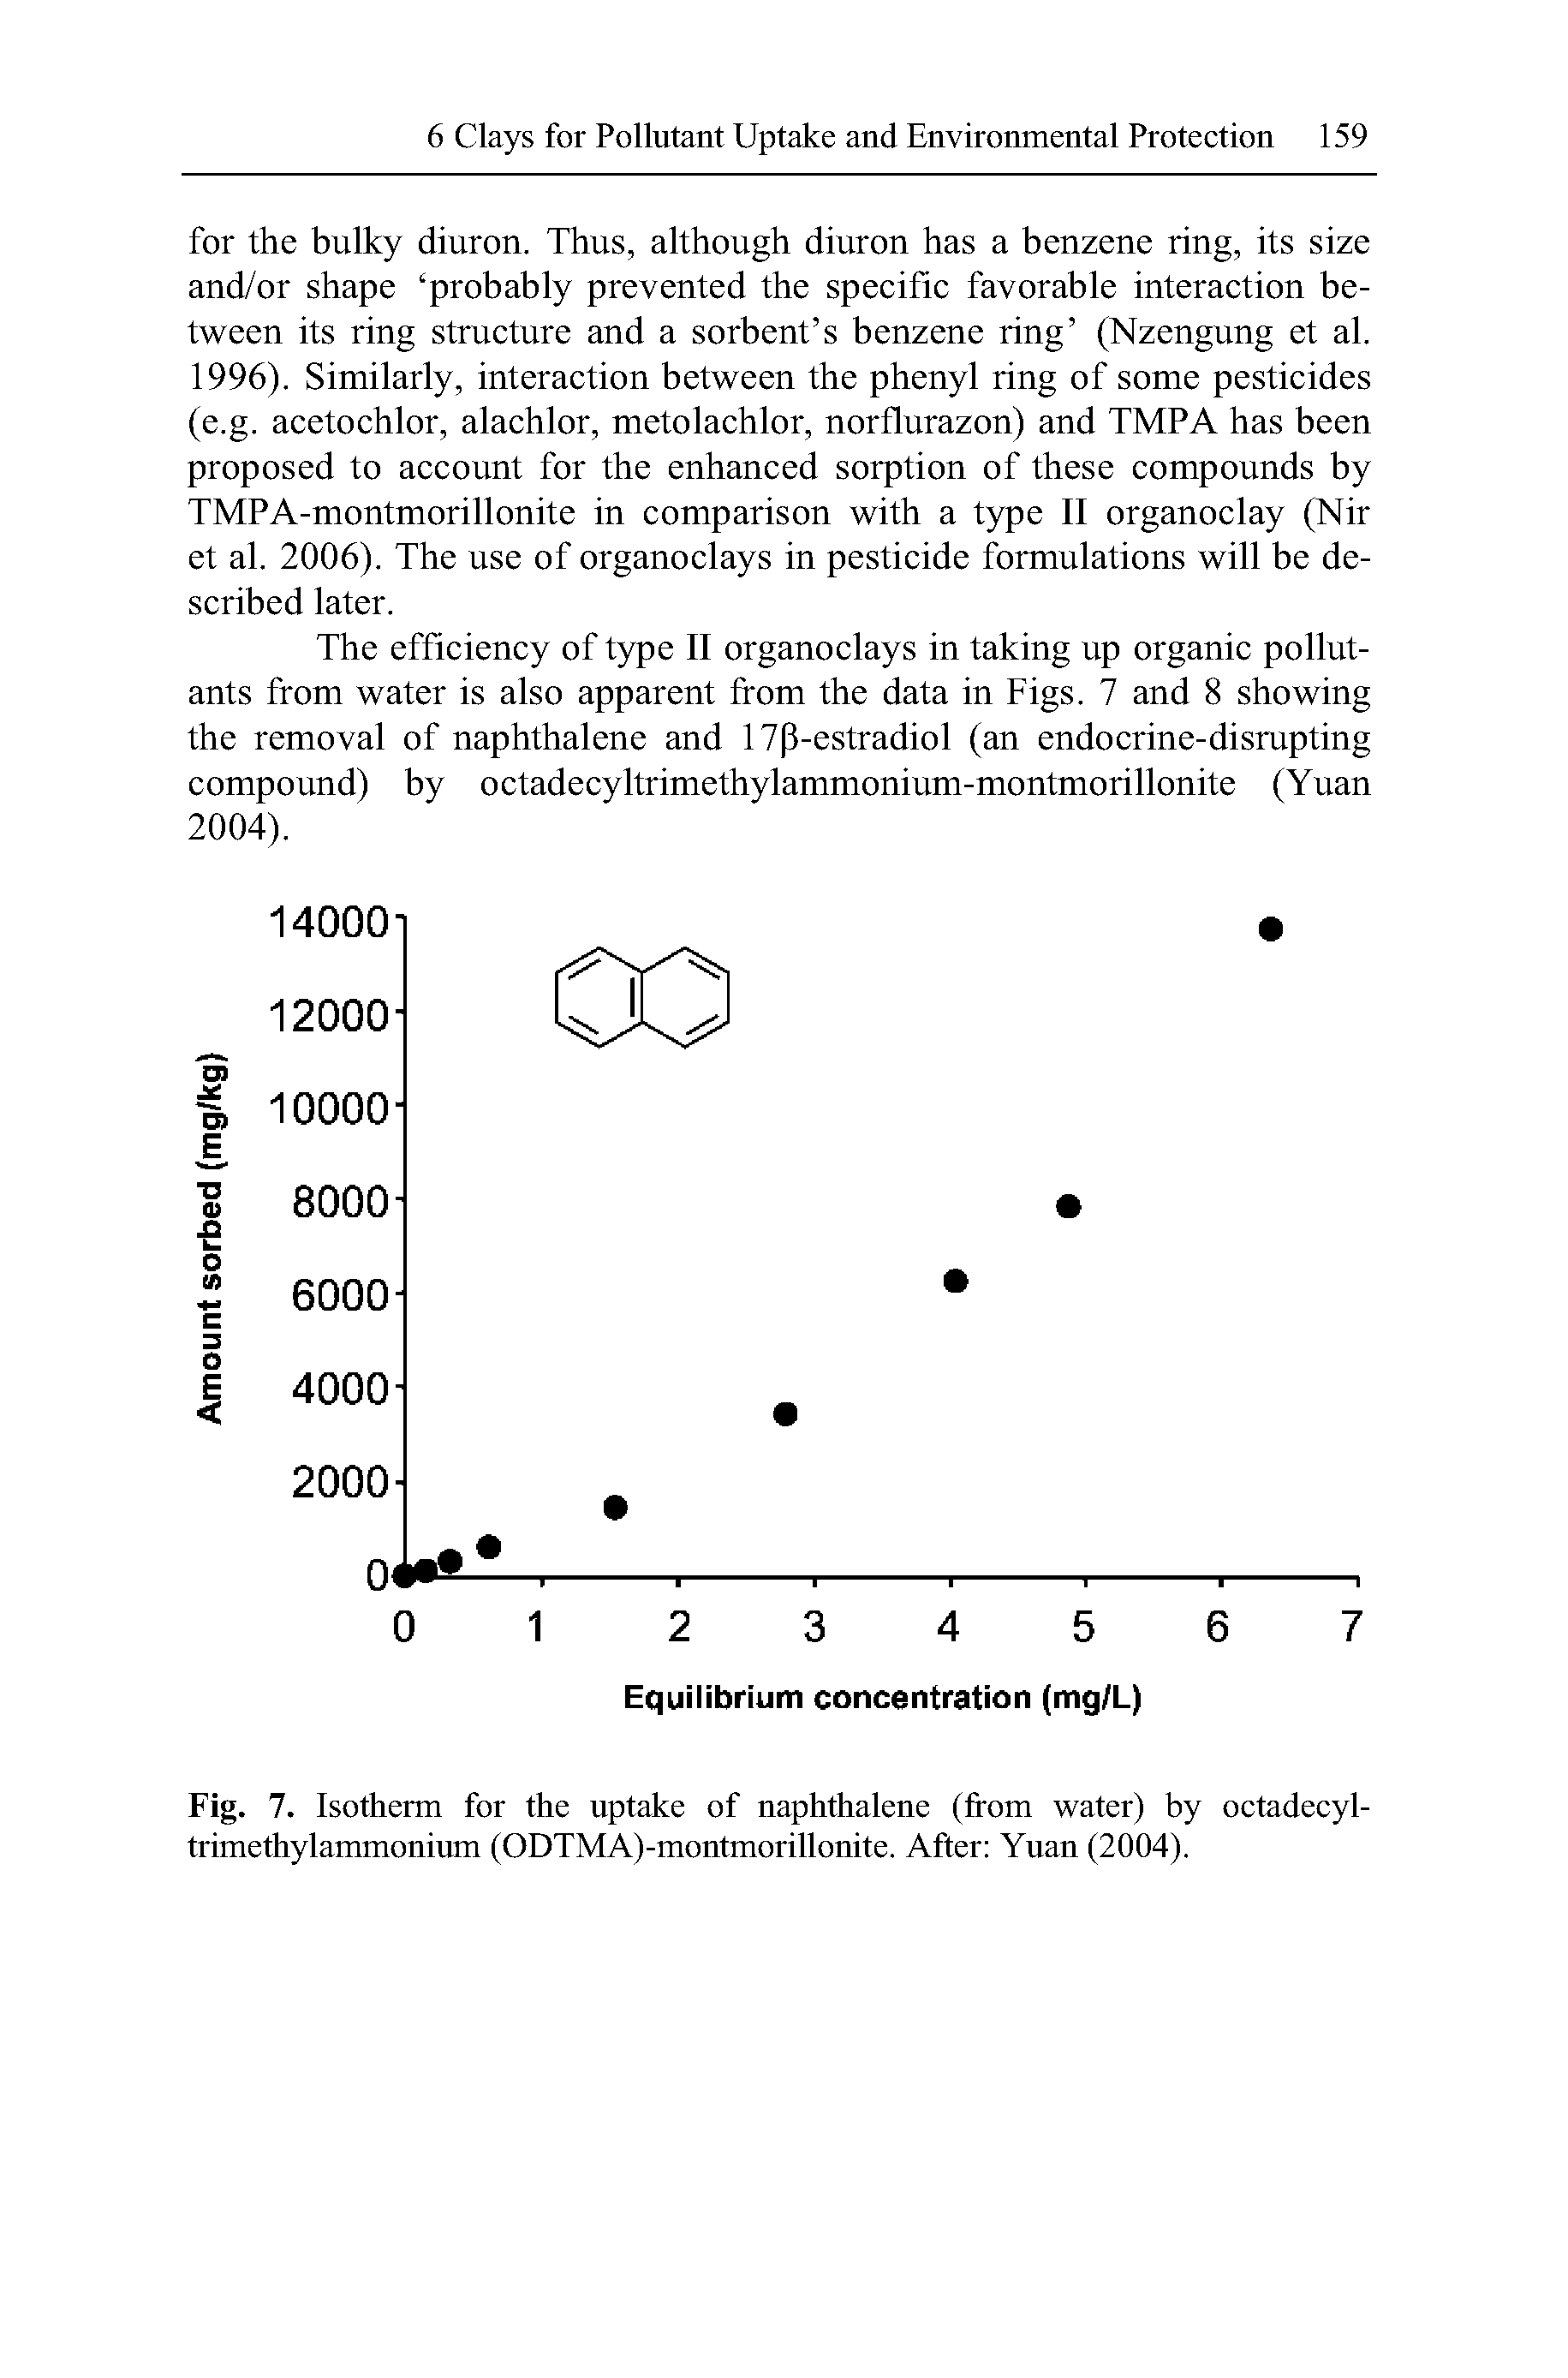 Fig. 7. Isotherm for the uptake of naphthalene (from water) by octadecyl-trimethylammonium (ODTMA)-montmorillonite. After Yuan (2004).